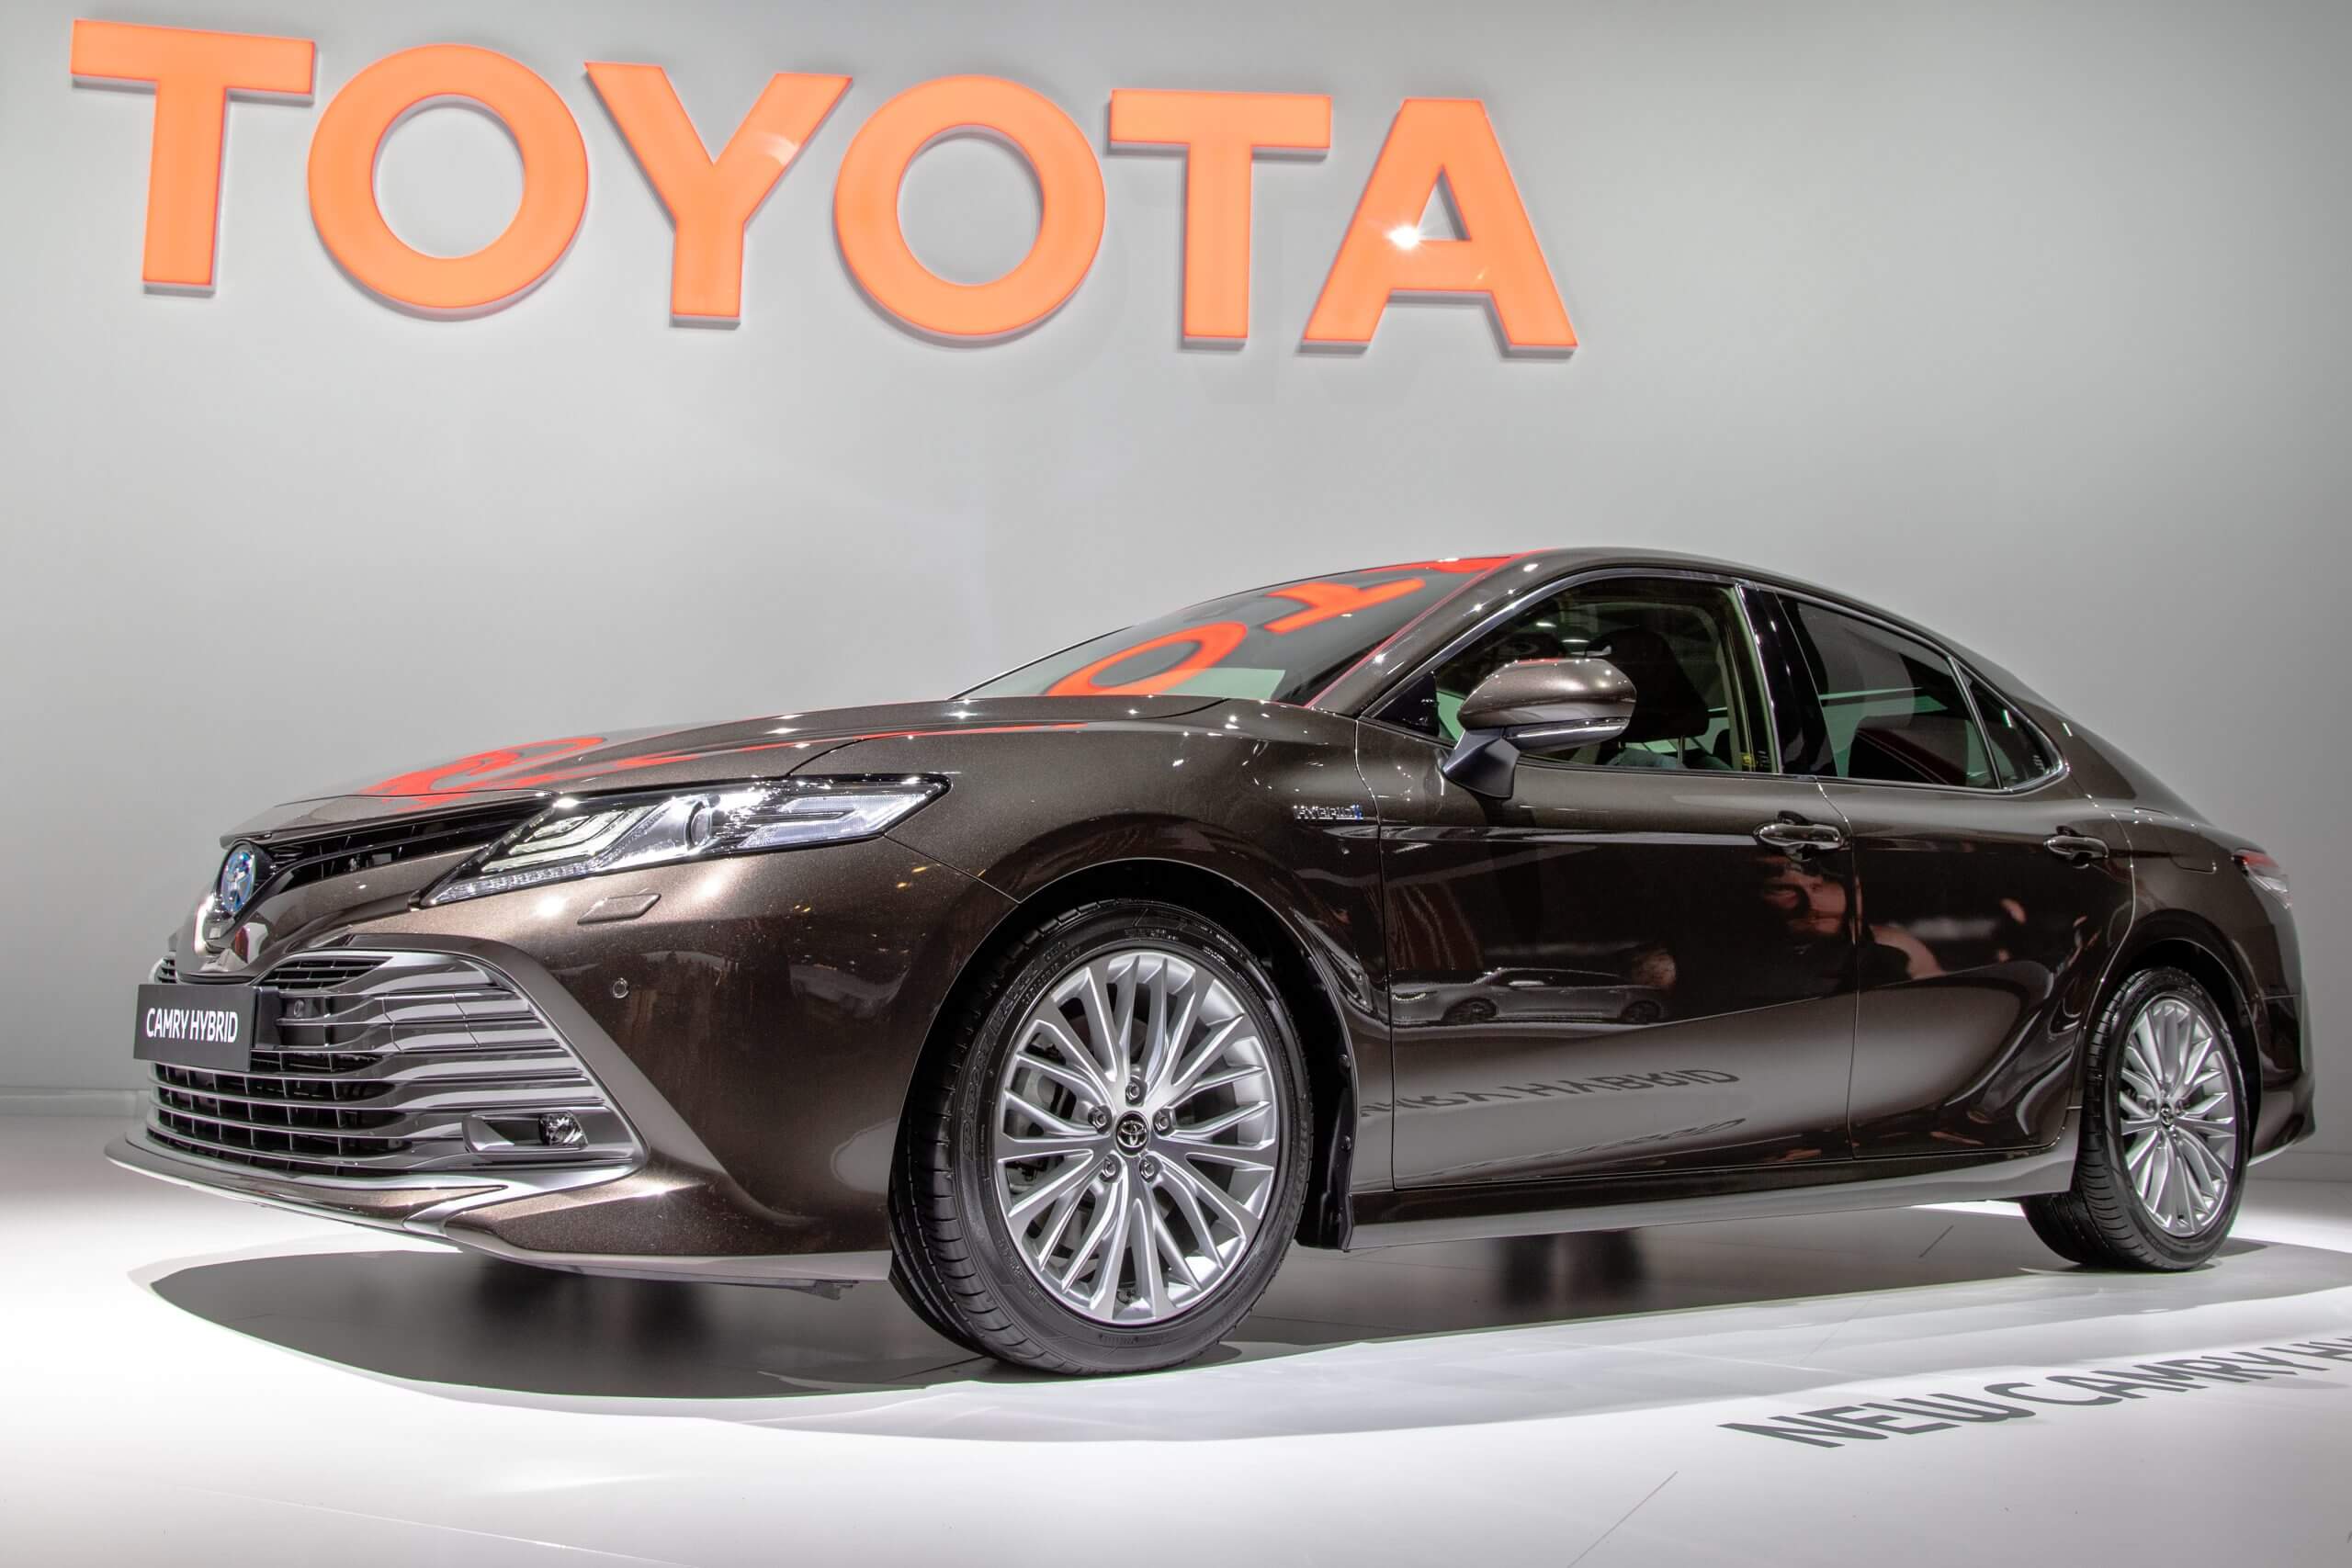 New Toyota Camry Hybrid car unveiled at the Paris Motor Show.